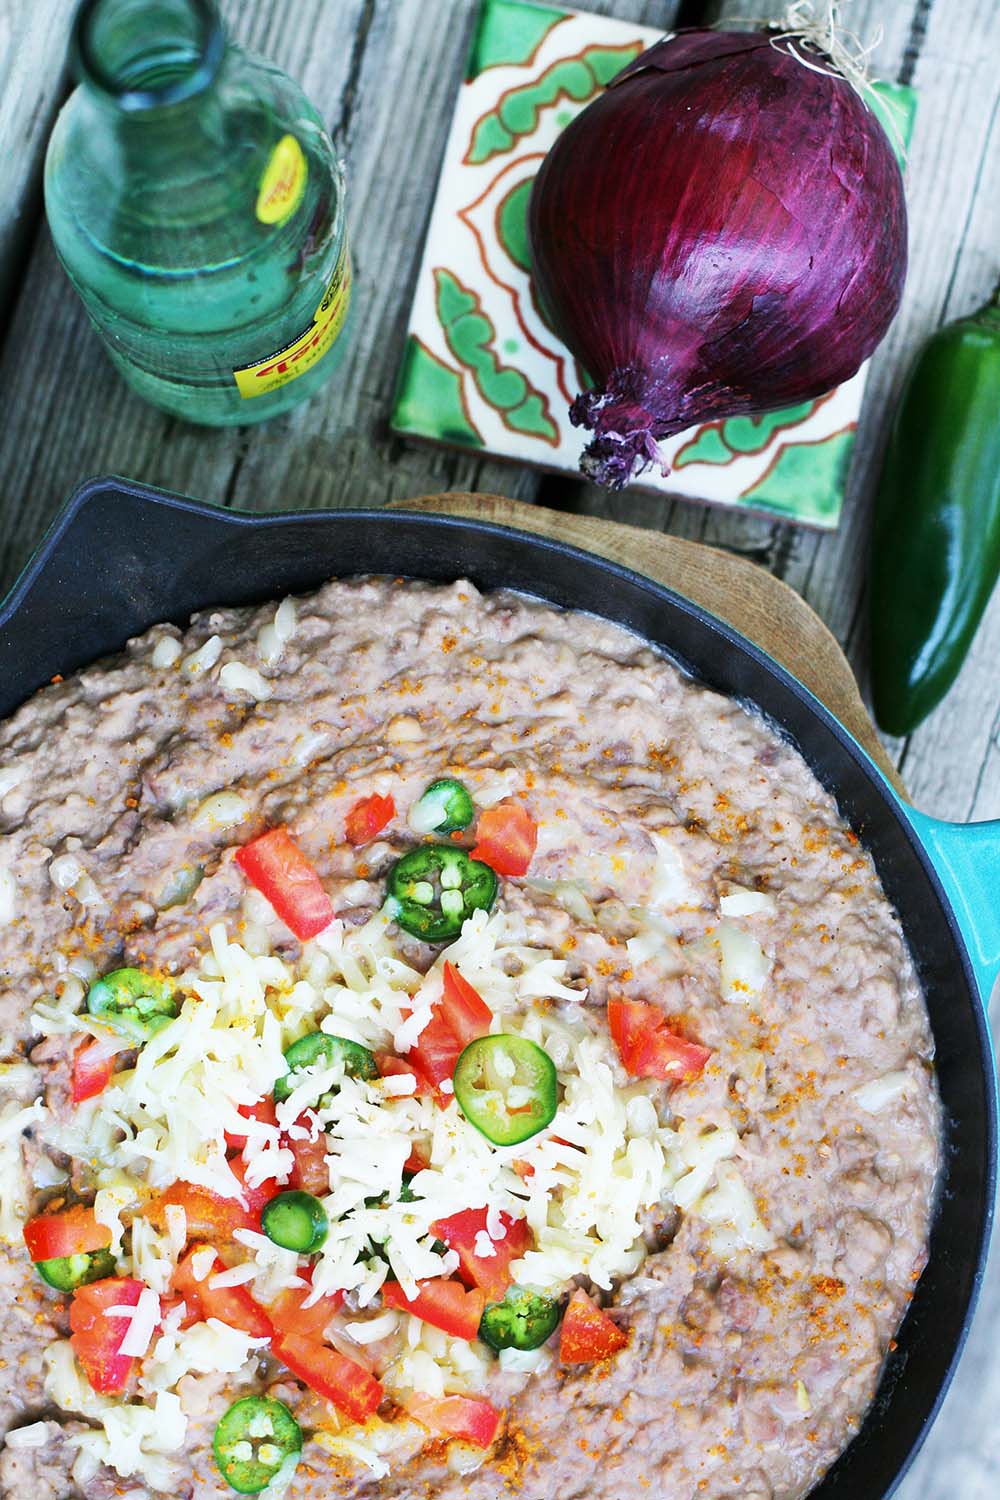 How to make homemade refried beans: Click through for detailed instructions.